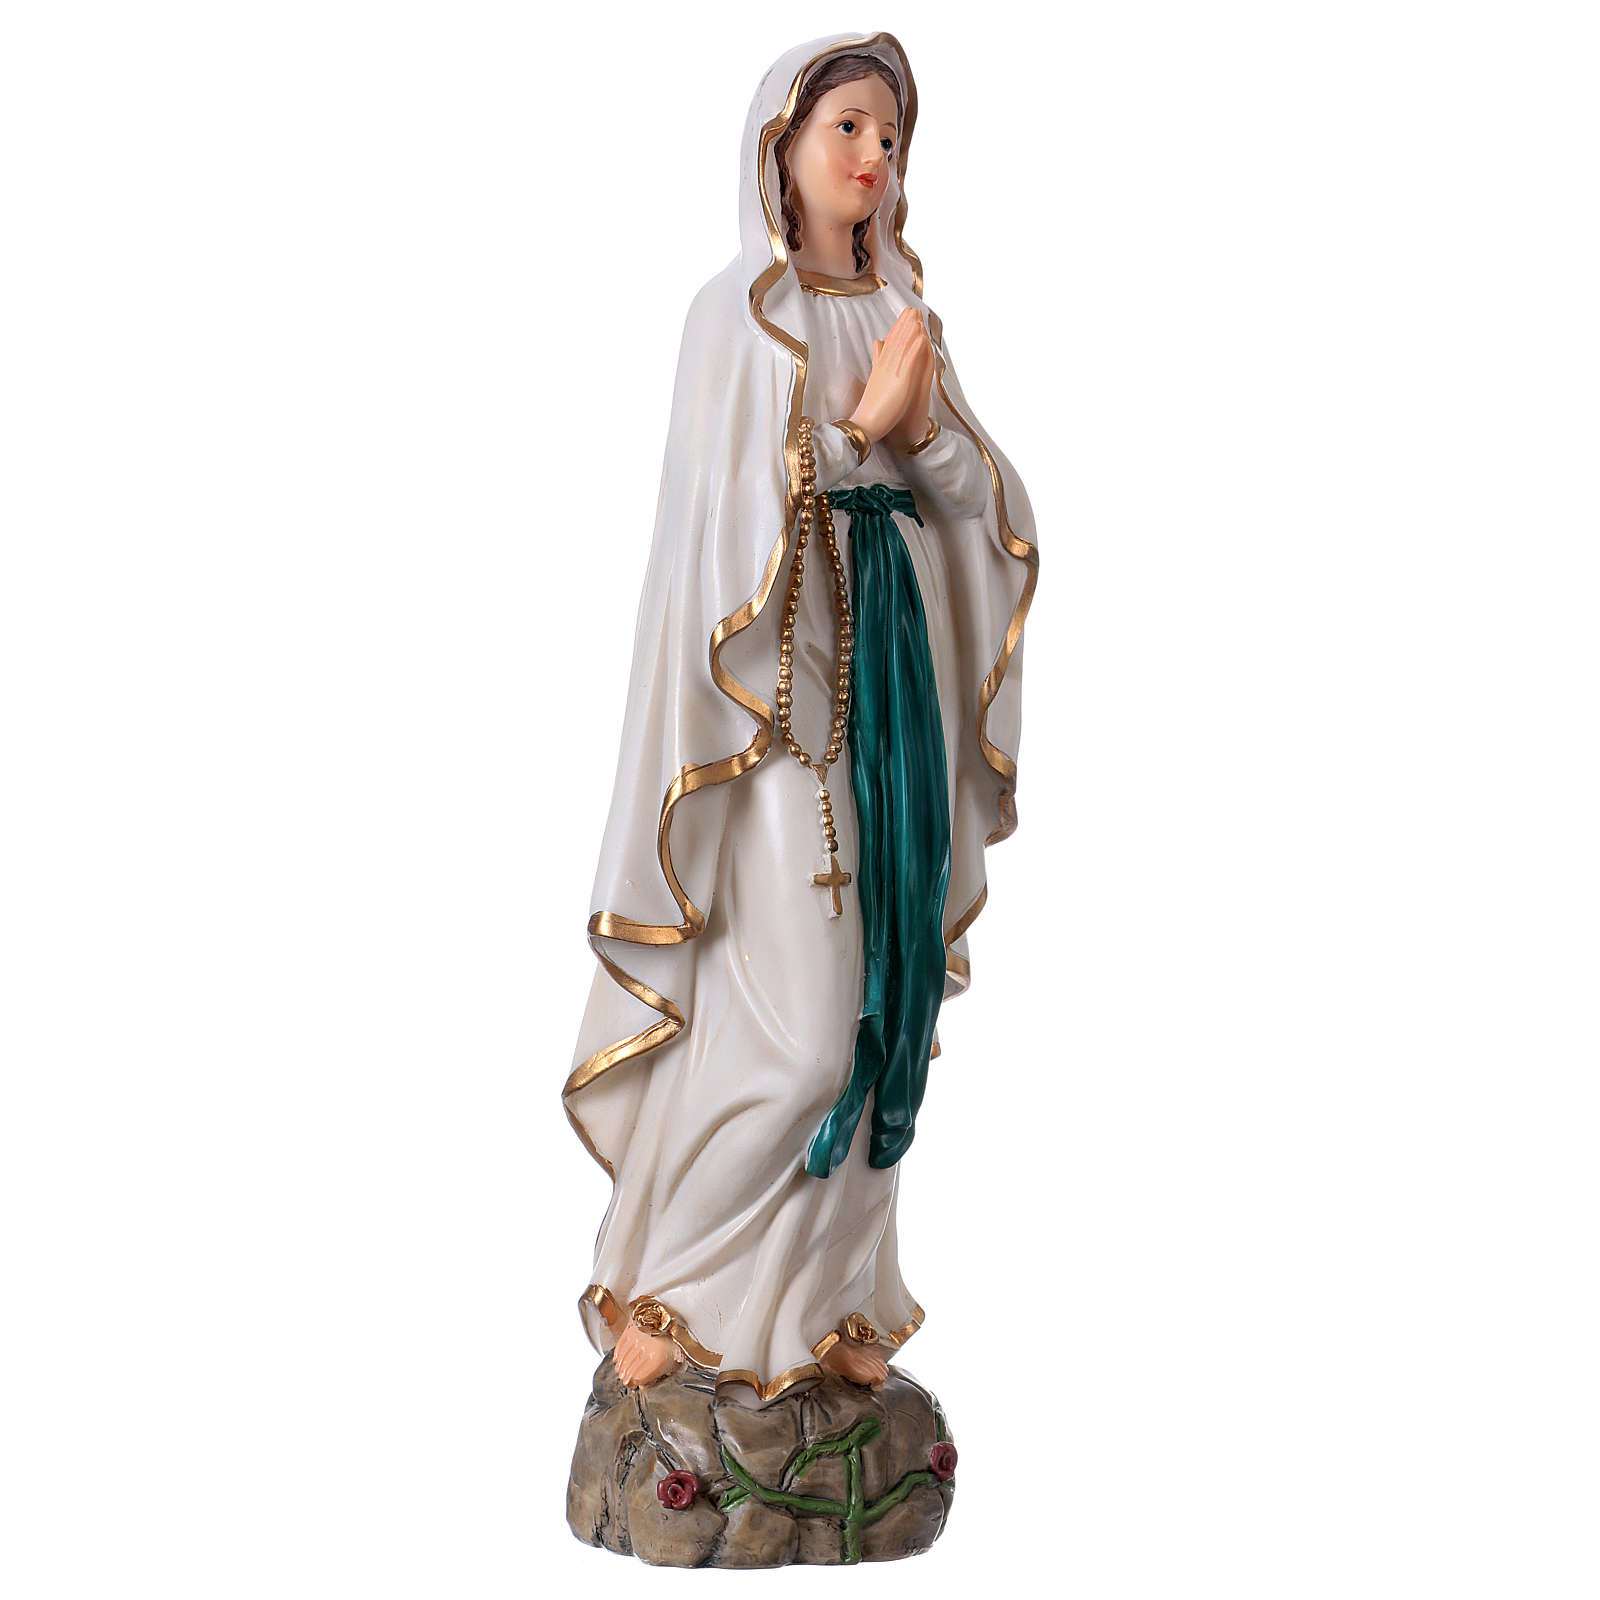 Our Lady of Lourdes Resin Statue, 30 cm | online sales on HOLYART.com